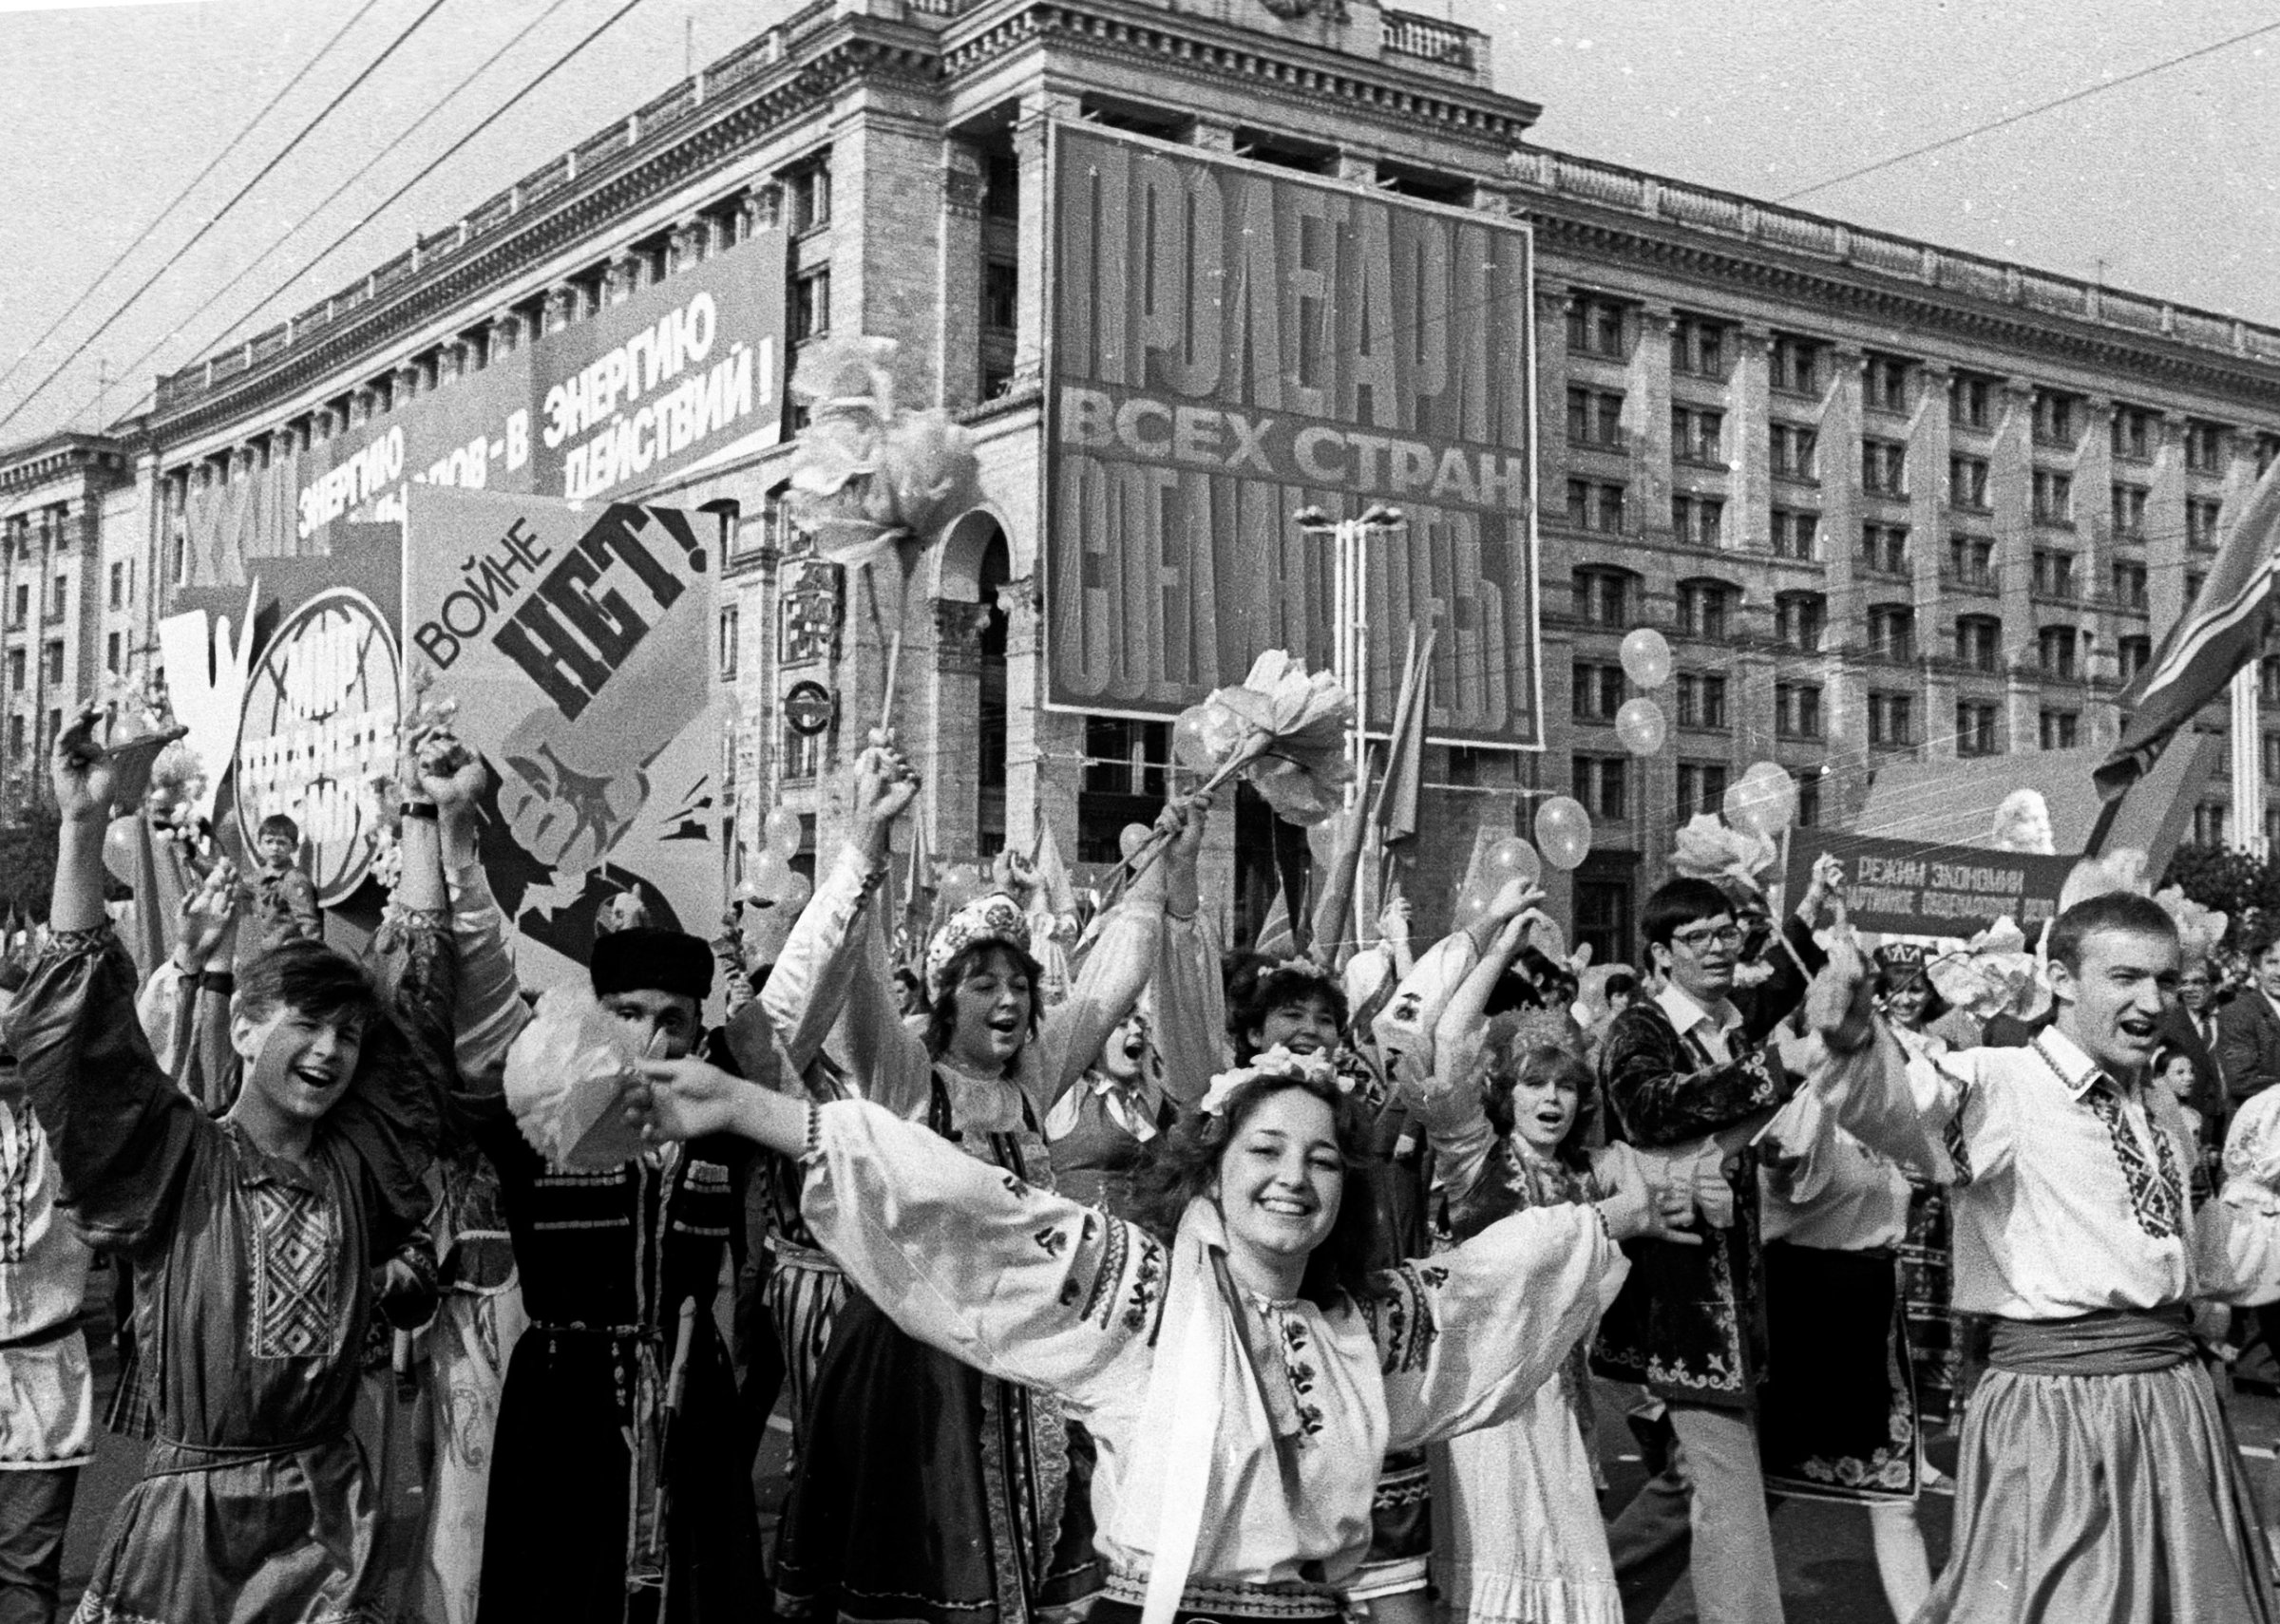 FILE - In this photo taken May 1, 1986 in Ukraine's capital Kiev, people rally to celebrate the May Day a few days after the deadly explosion on the 4th unit in Chernobyl nuclear power plant. Nobody cancelled a May Day parade in Kiev when thousands of people walked in columns along the streets, with songs, flowers and Soviet leaders portraits, covered with invisible clouds of fatal radiation. The Chernobyl nuclear power plant explosion was only about 60 miles from photographer Efrem Lukatsky's home, but he didn’t learn about it until the next morning from a neighbor. Only a few photographers were allowed to cover the destroyed reactor and desperate cleanup efforts, and all of them paid for it with their health. I went a few months later, and have returned dozens of times. (AP Photo)